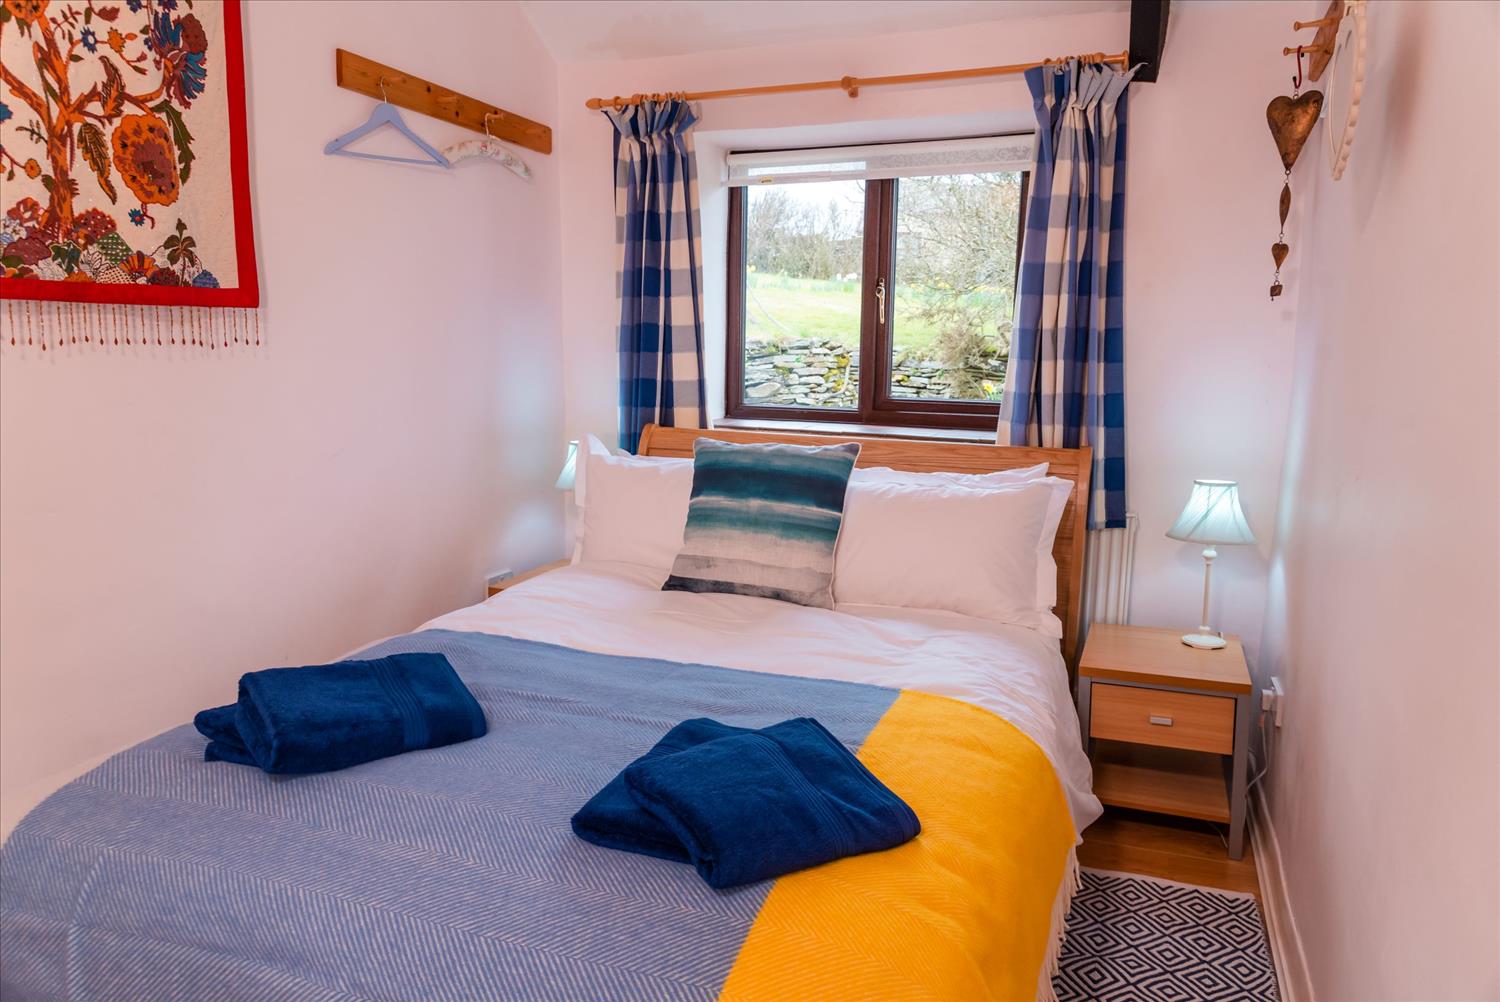 The double bedroom at Polrunny Farm's Elderberry Cottage. The yellows and blues of the throw, the towels and the cushions mirror the colours of the beach and the sea.